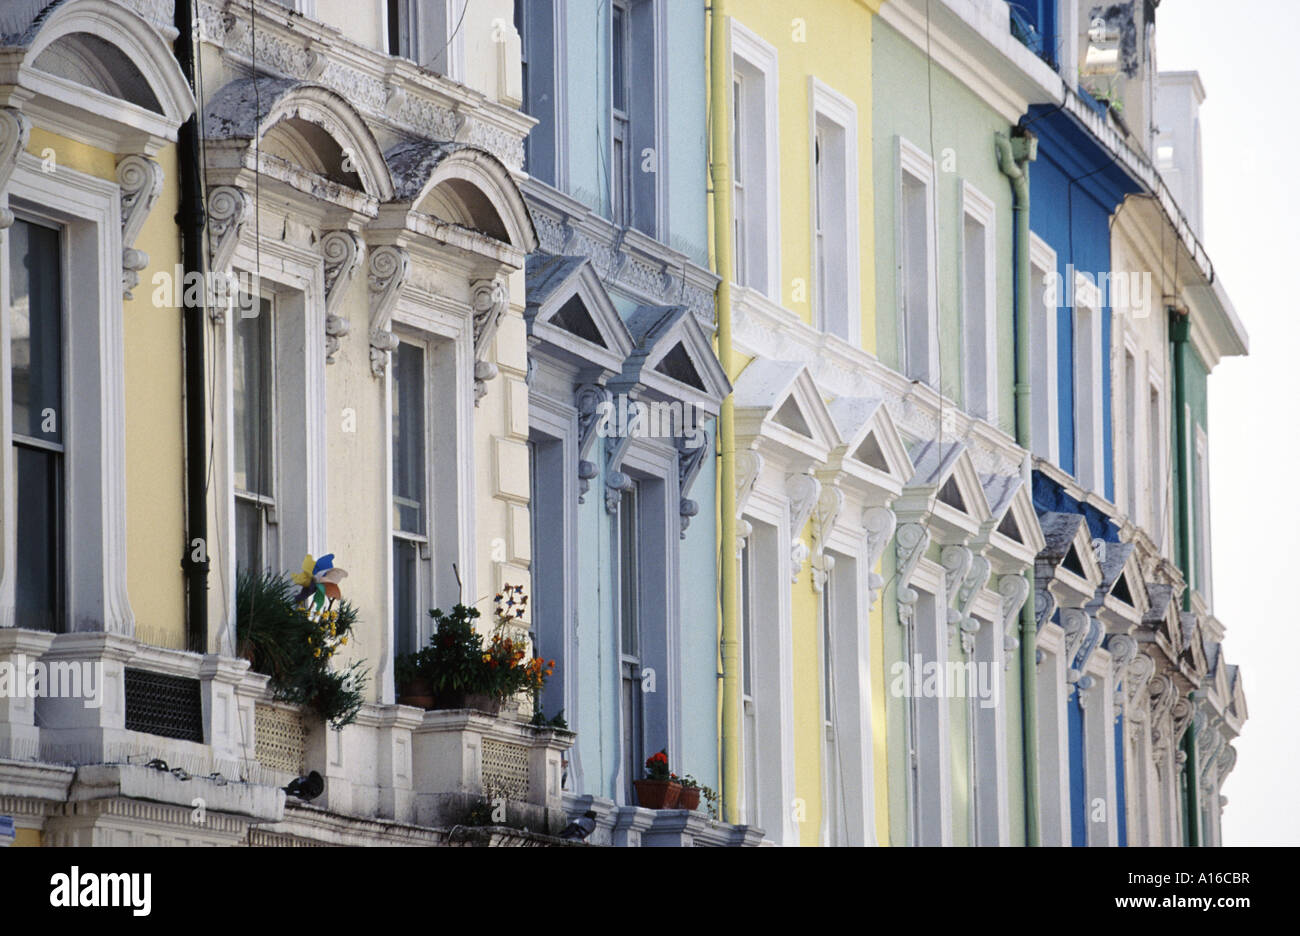 Colourful facade of a residential street in Notting Hill London W11 an upmarket and trendy neighbourhood Stock Photo